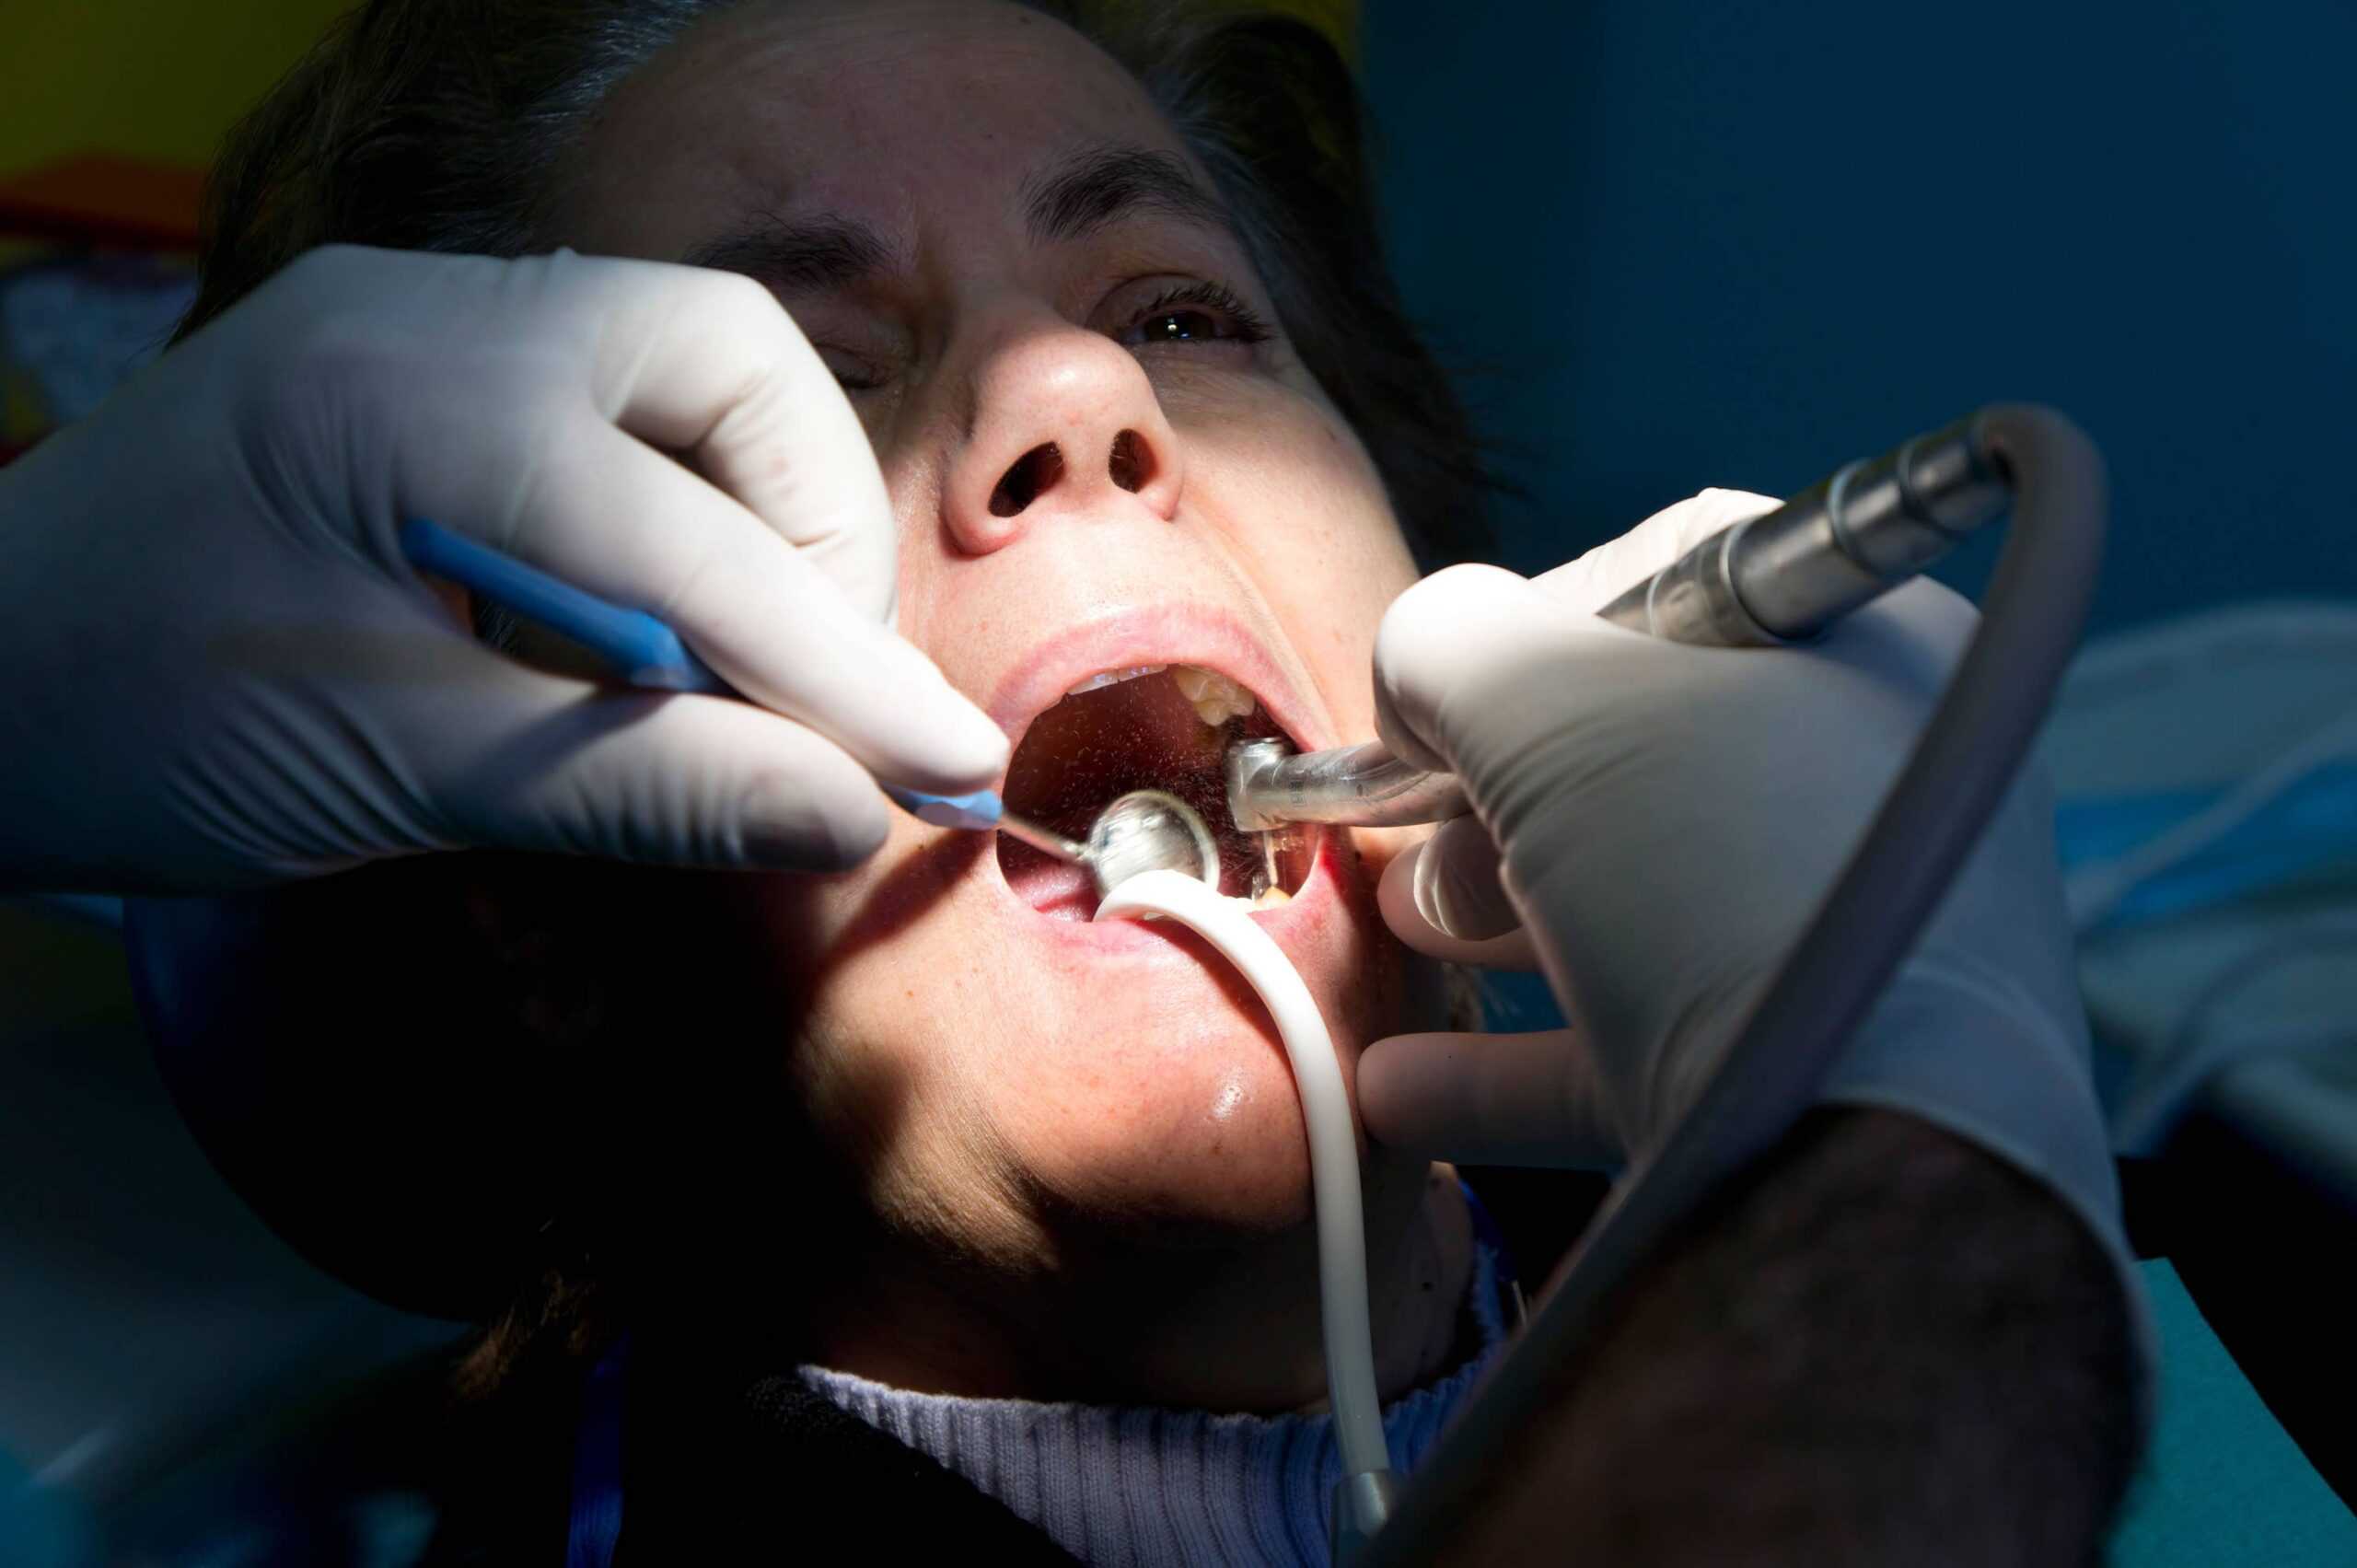 NHS dentistry is ‘gone for good’ – report